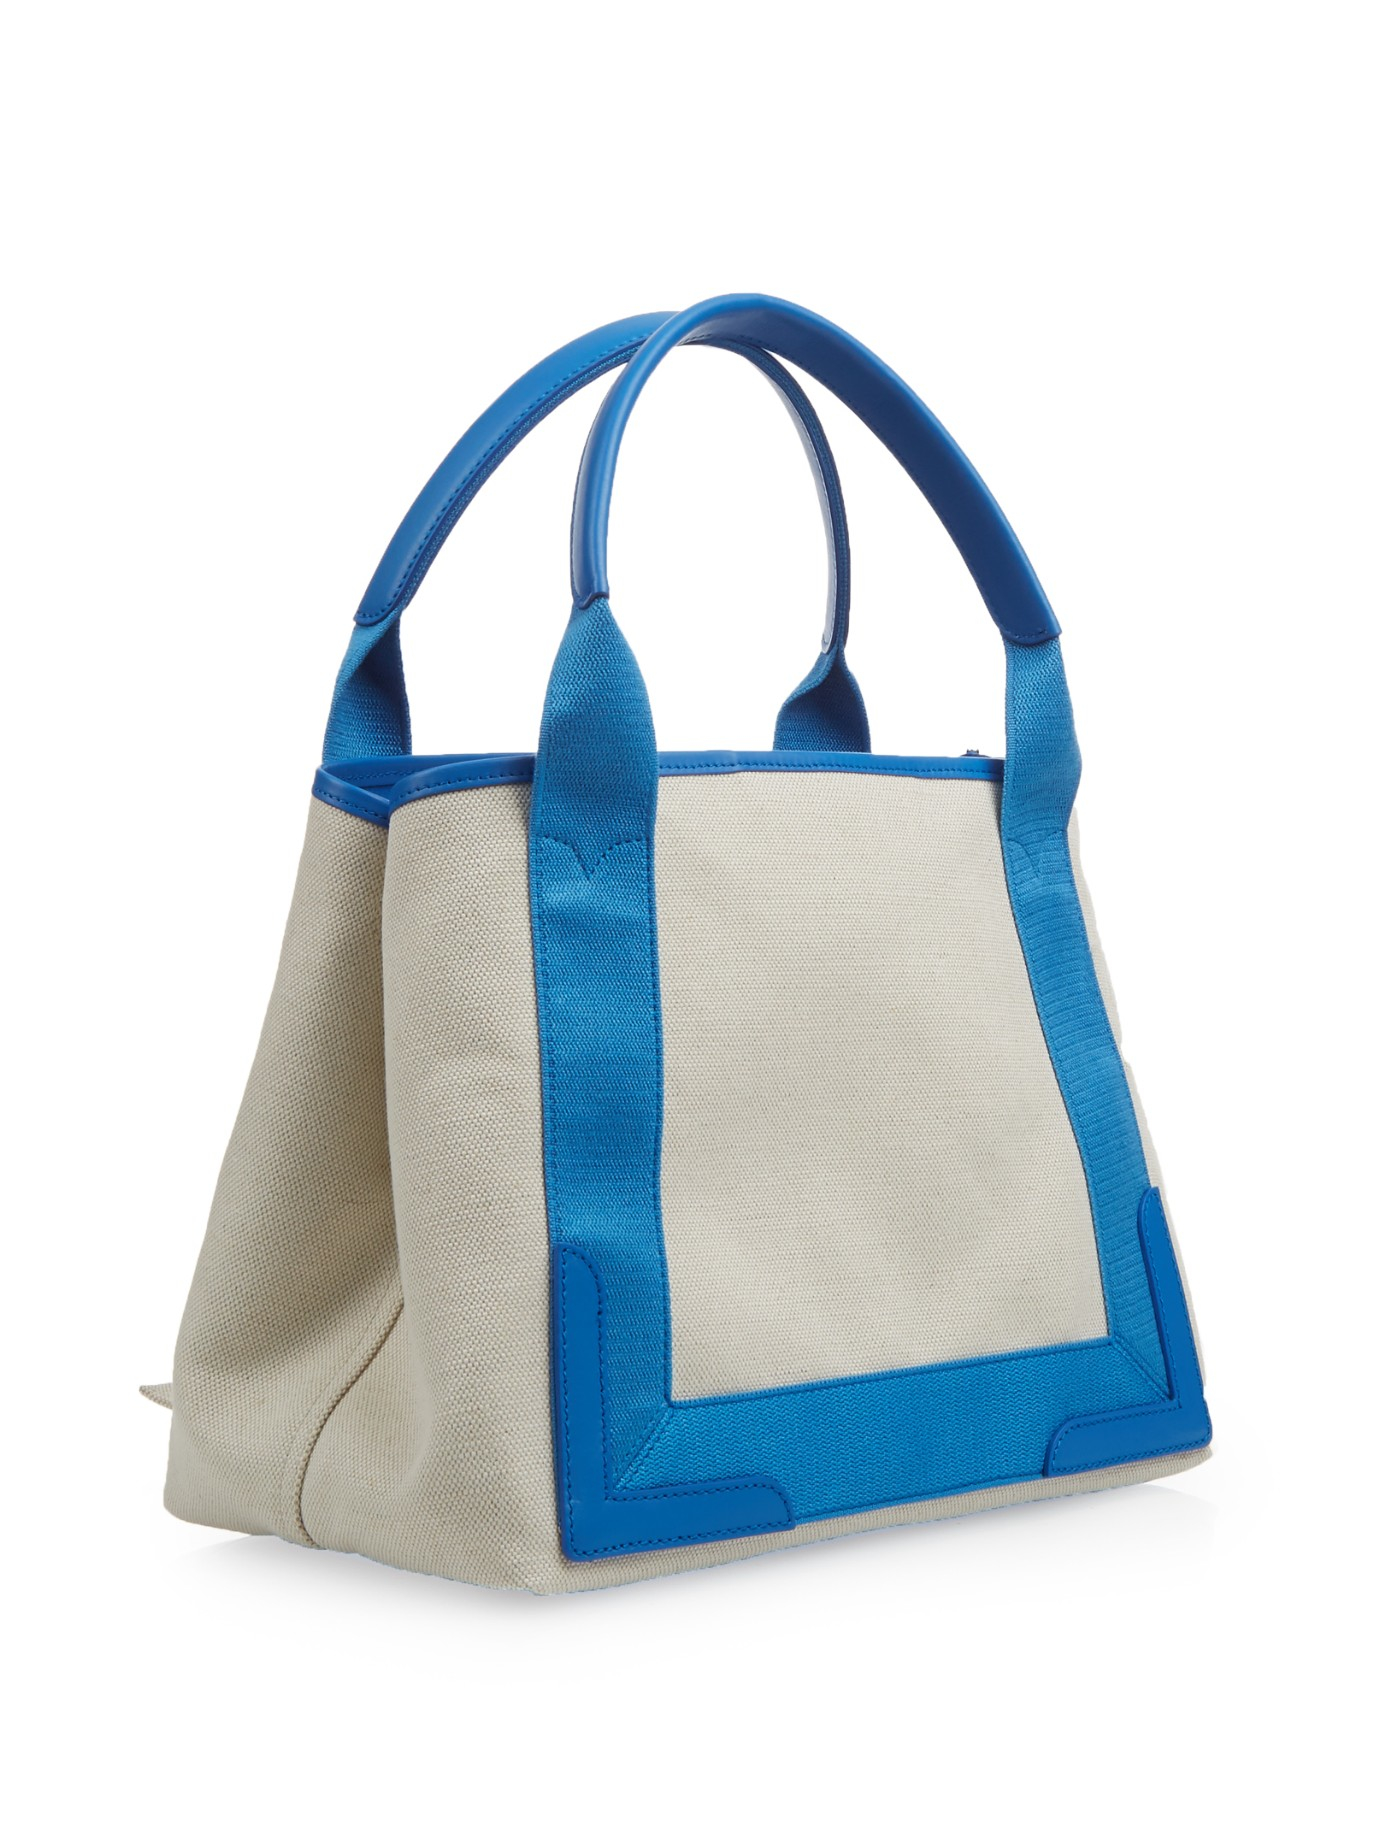 Balenciaga Cabas S Leather-Trimmed Cotton-Canvas Tote in Natural